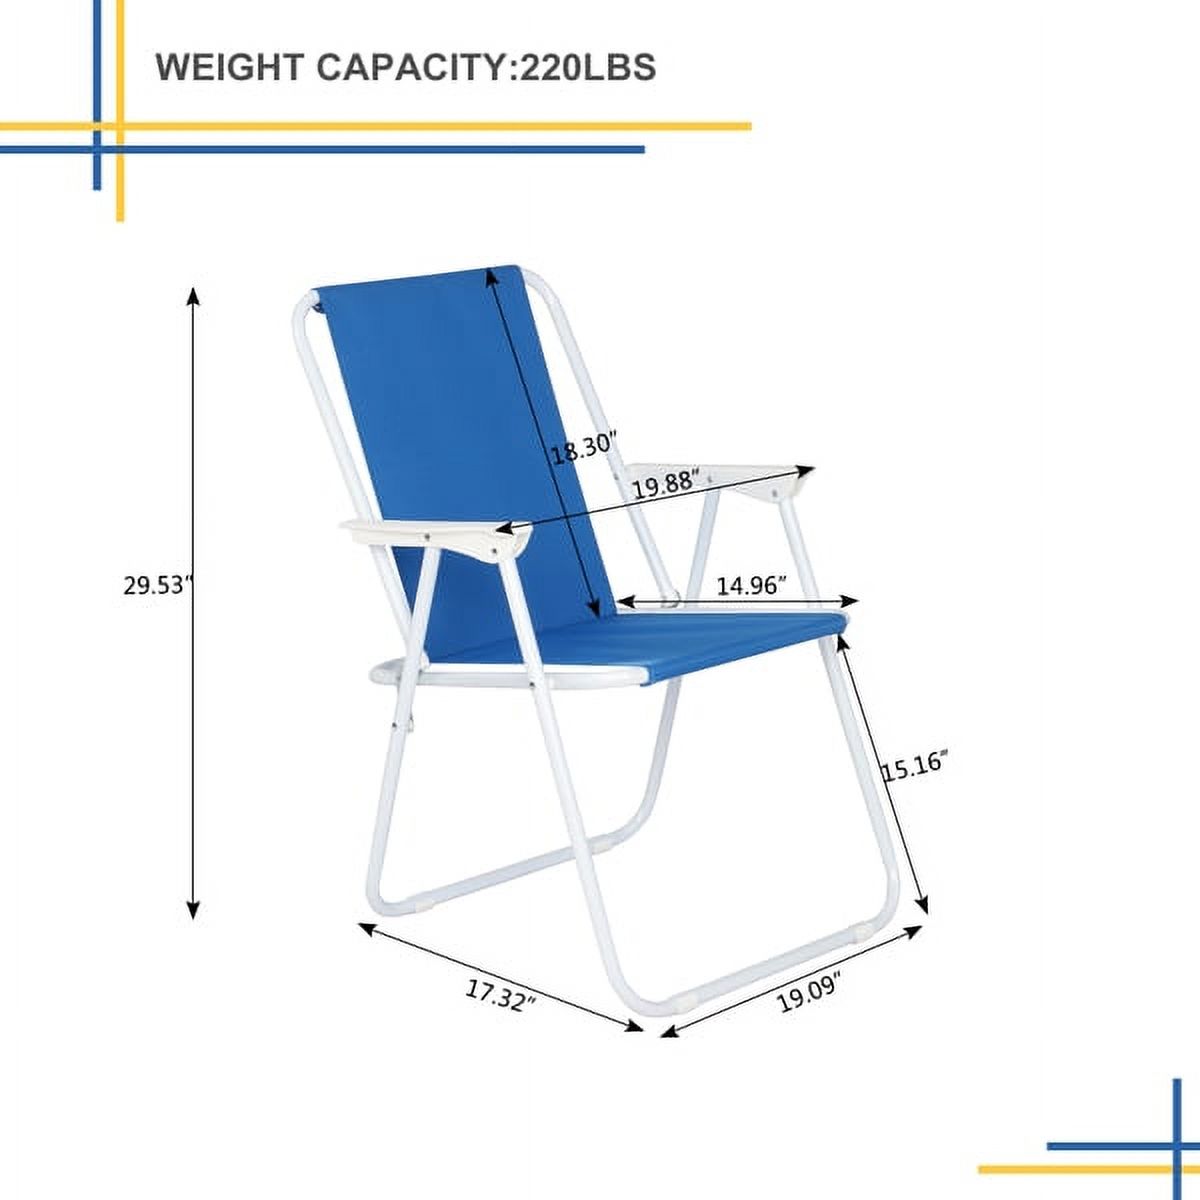 Folding Chair, Portable Patio Chair, Patio Dining Chairs, Stackable Storage Lawn/Camping Chair- Blue - image 2 of 8